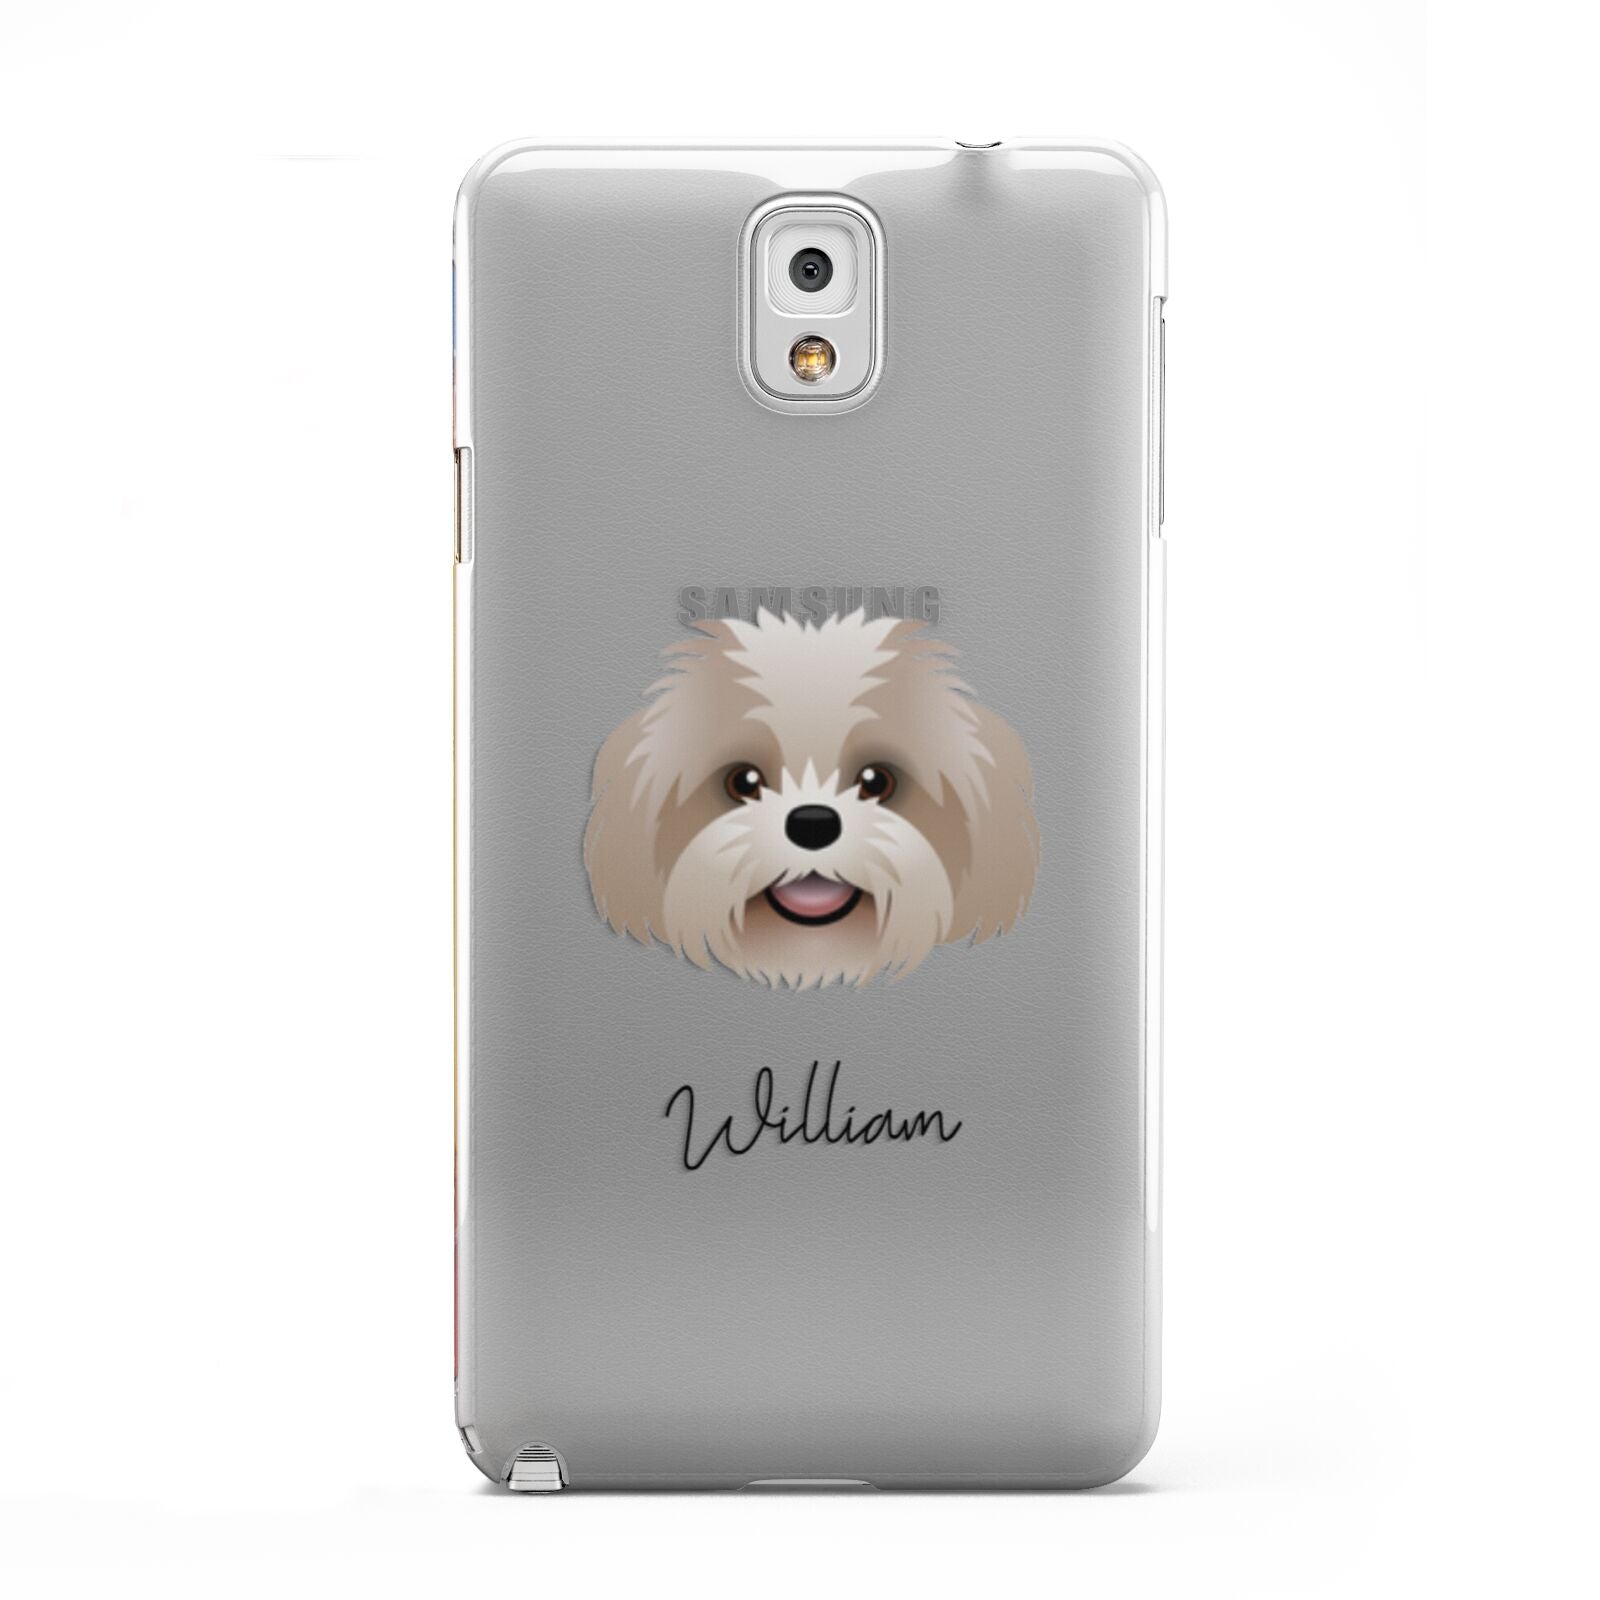 Shih Poo Personalised Samsung Galaxy Note 3 Case